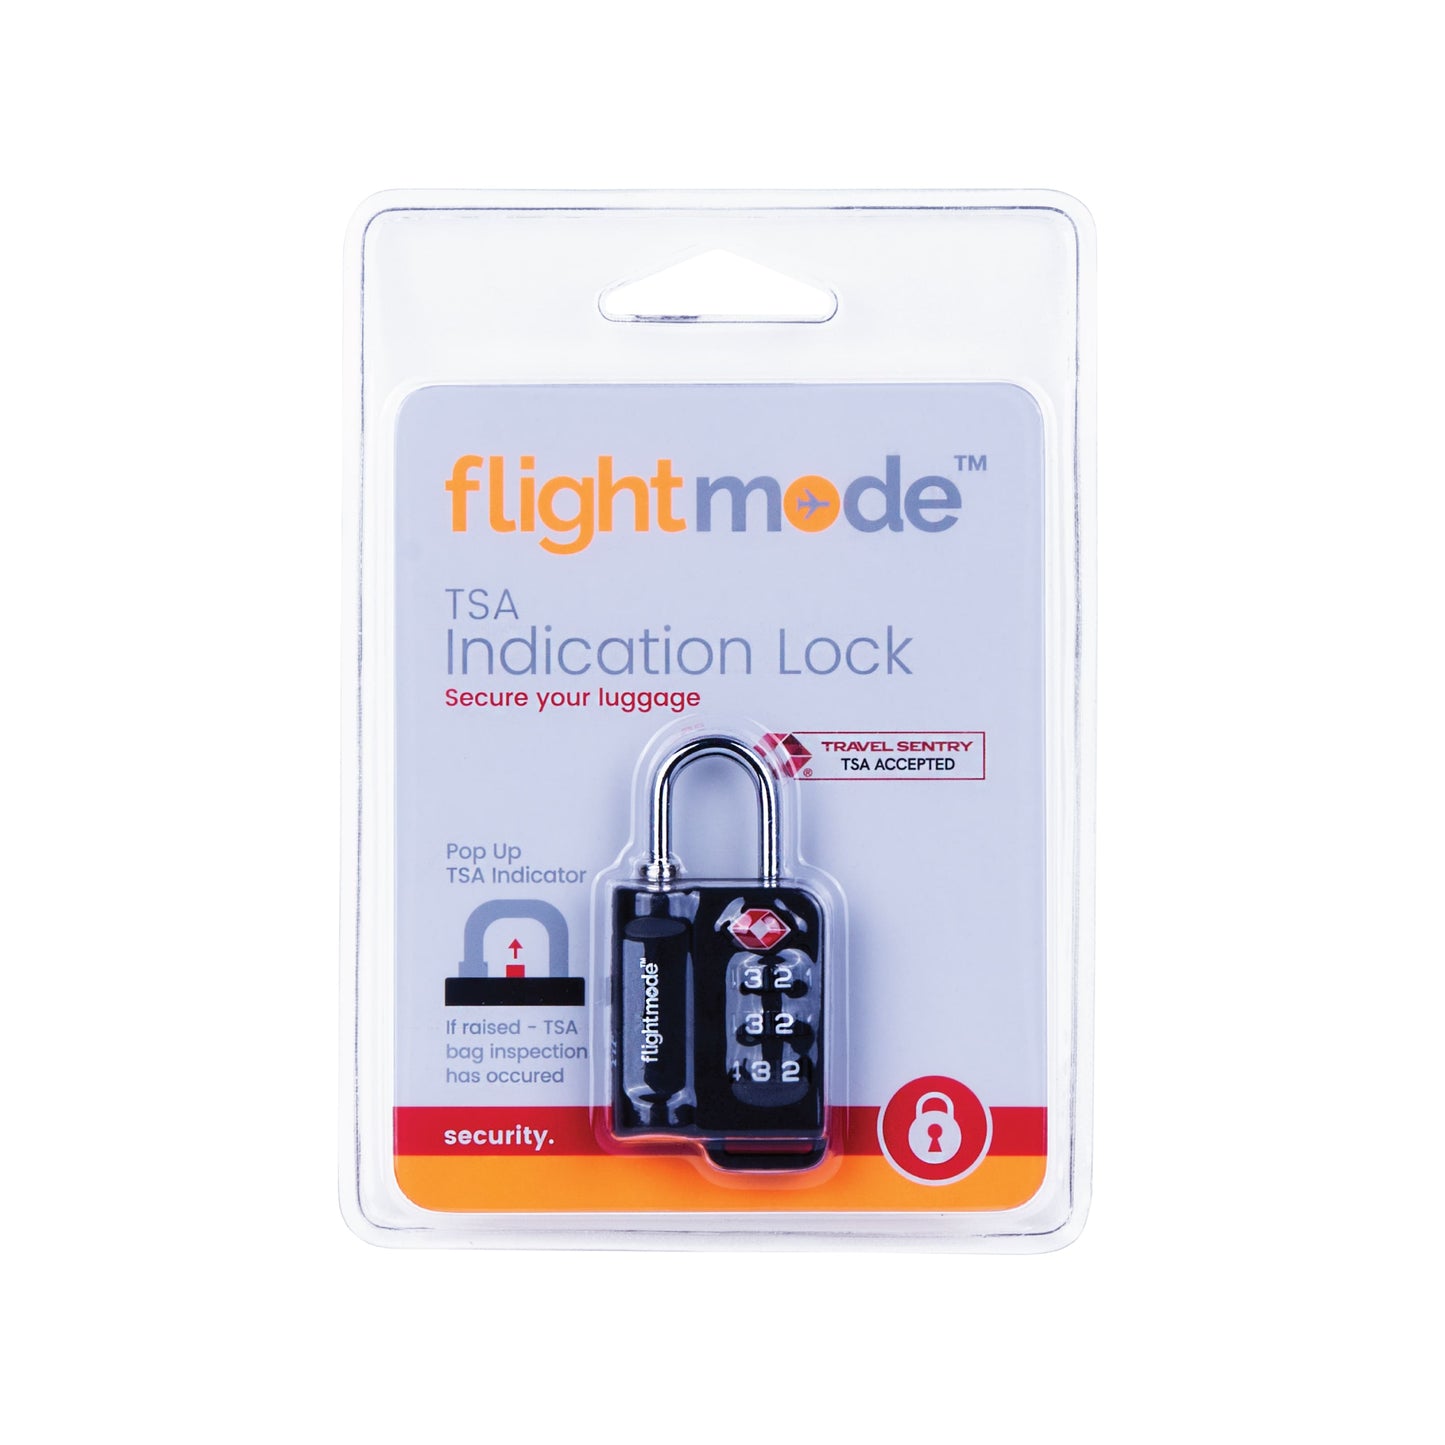 Flightmode TSA 3 Dial Indicator Padlock - Using this Travel Sentry® Approved lock allows your luggage to be unlocked and inspected by security authorities without damage. If the pop-up indicator is raised up this means TSA luggage inspection has occurred. Deter would-be bag thefts with brutalist composition Solid 10mm compact case construction Lightweight 28gm body while still resistant to bag tampering Fits most bag and luggage zippers Ideal for; luggage, zippered bags, backpacks, overnight bags, and lock